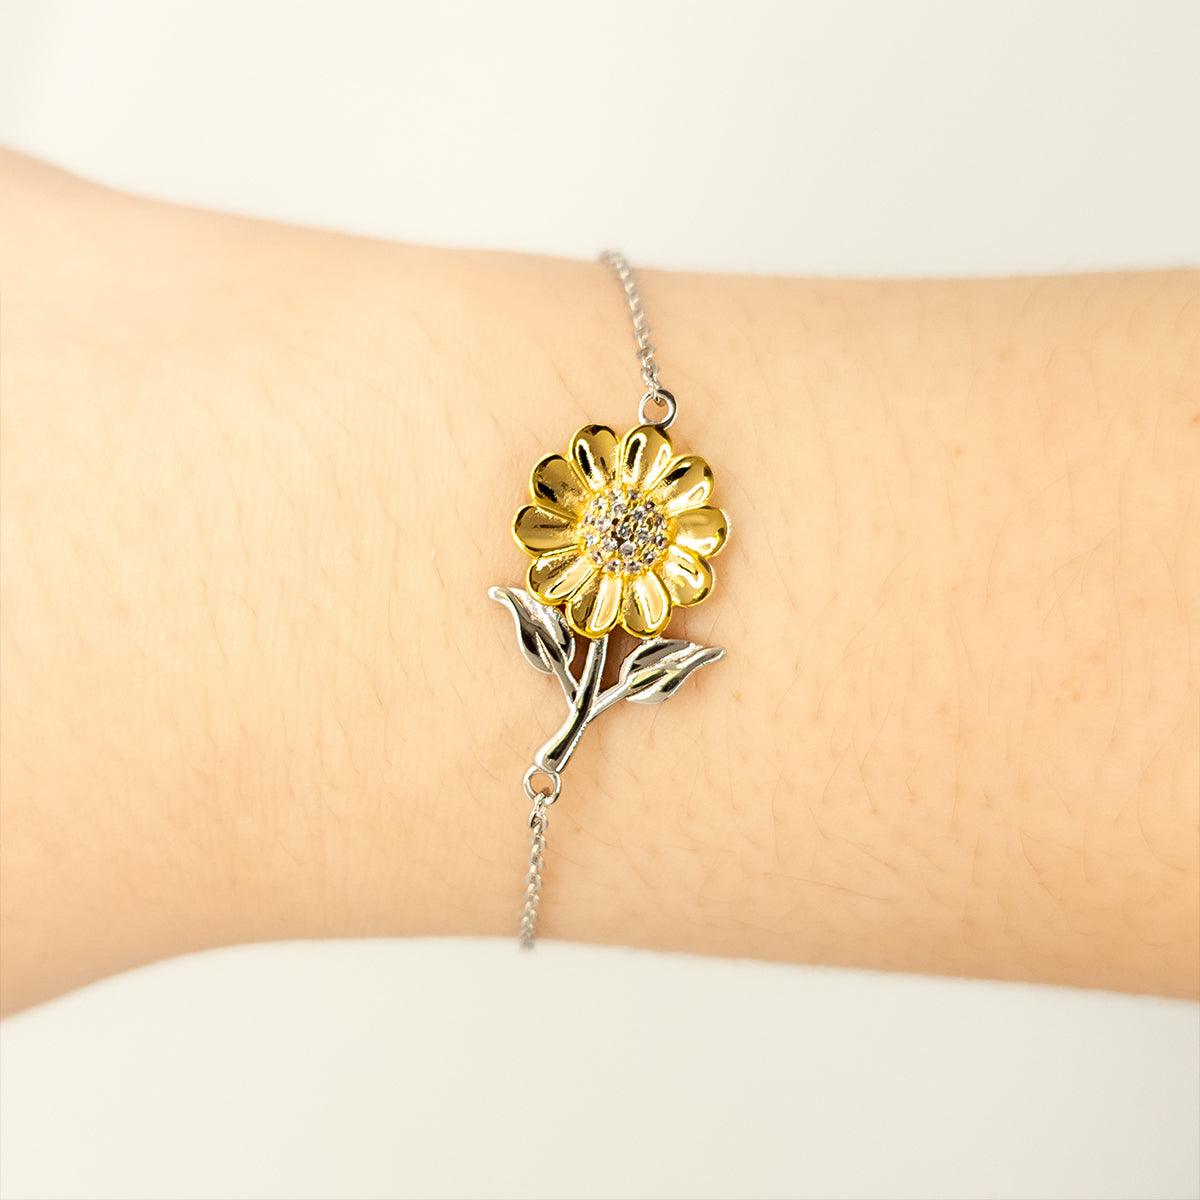 Sarcastic CPA Sunflower Bracelet Gifts, Christmas Holiday Gifts for CPA Birthday Message Card, CPA: Because greatness is woven into the fabric of every day, Coworkers, Friends - Mallard Moon Gift Shop